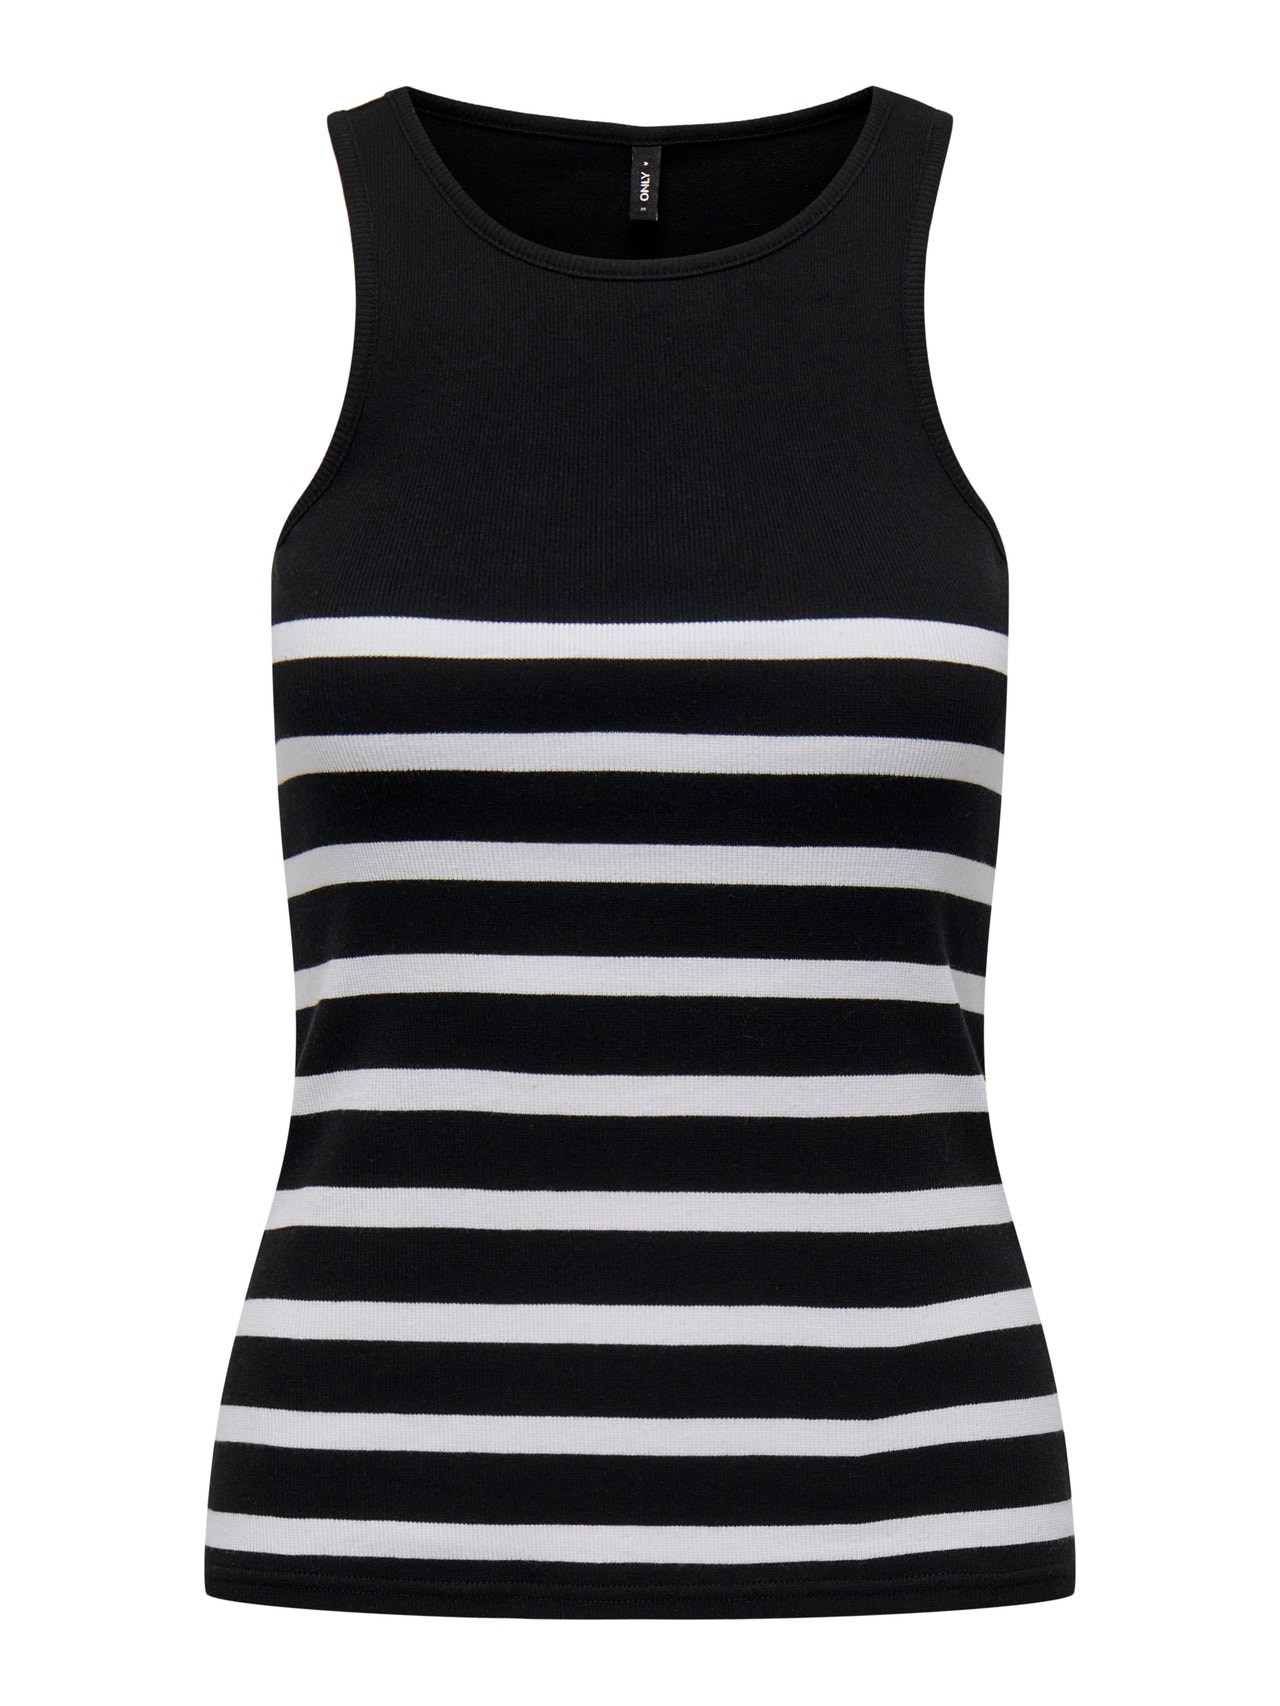 ONLY O-neck tank top -Black - 15318407